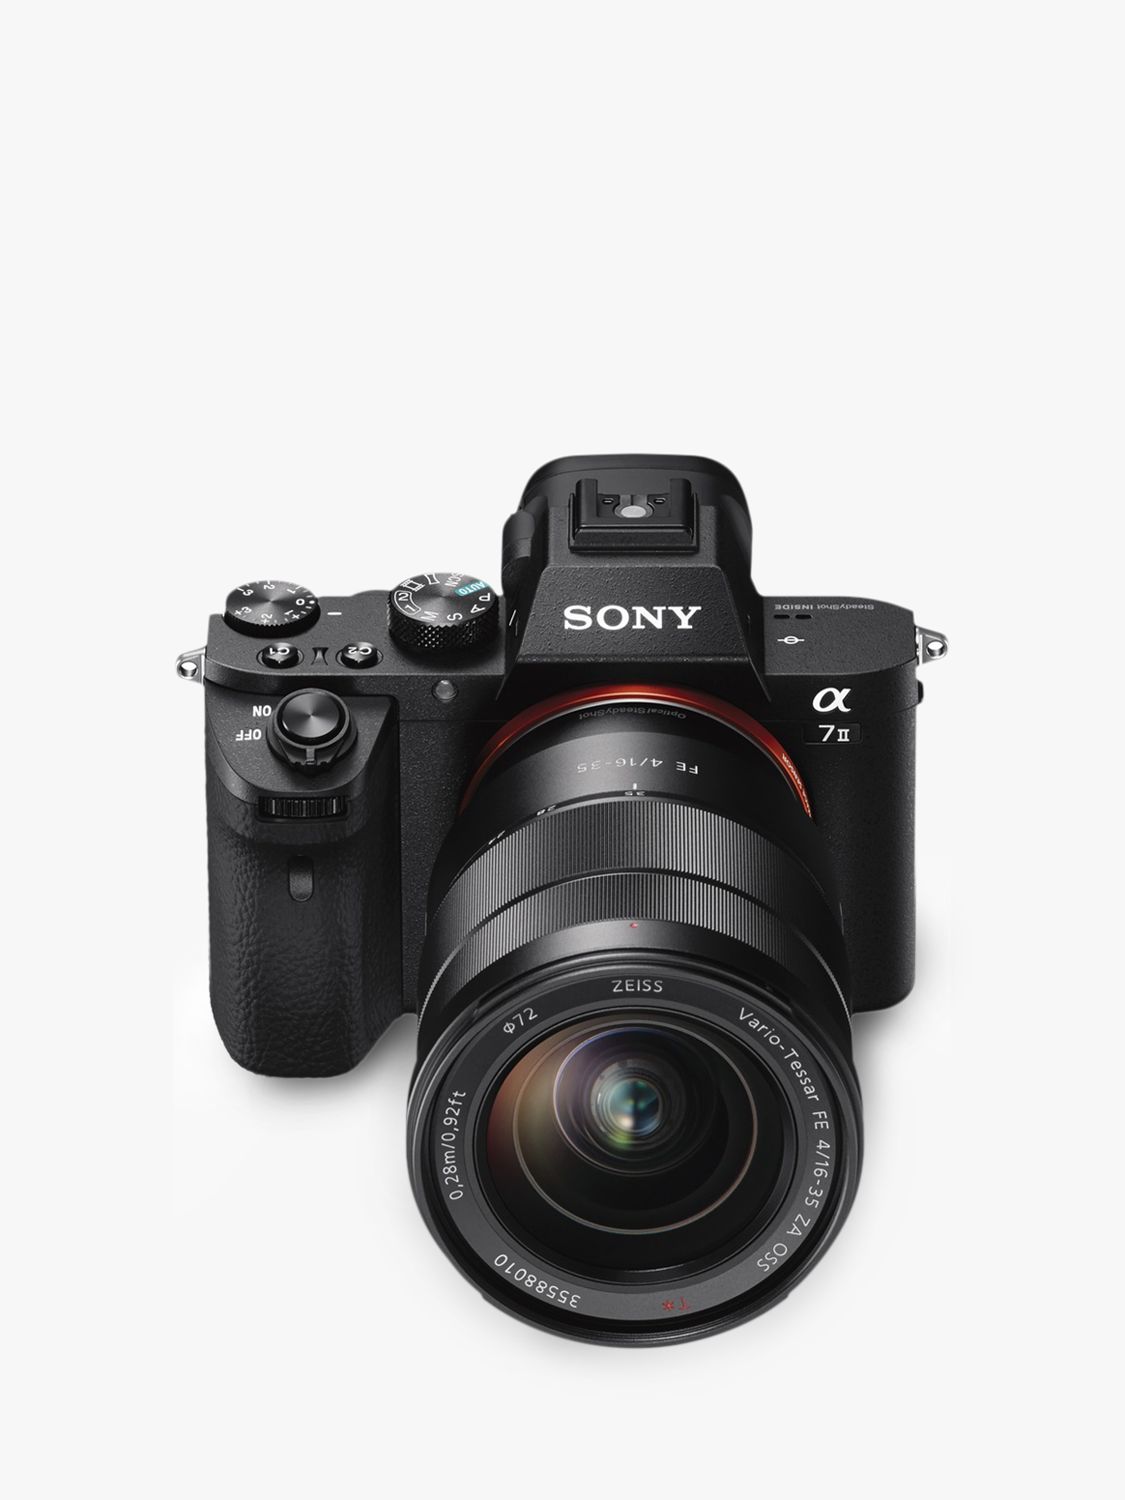 Sony a7 II (Alpha ILCE-7M2) Compact System Camera With HD 1080p